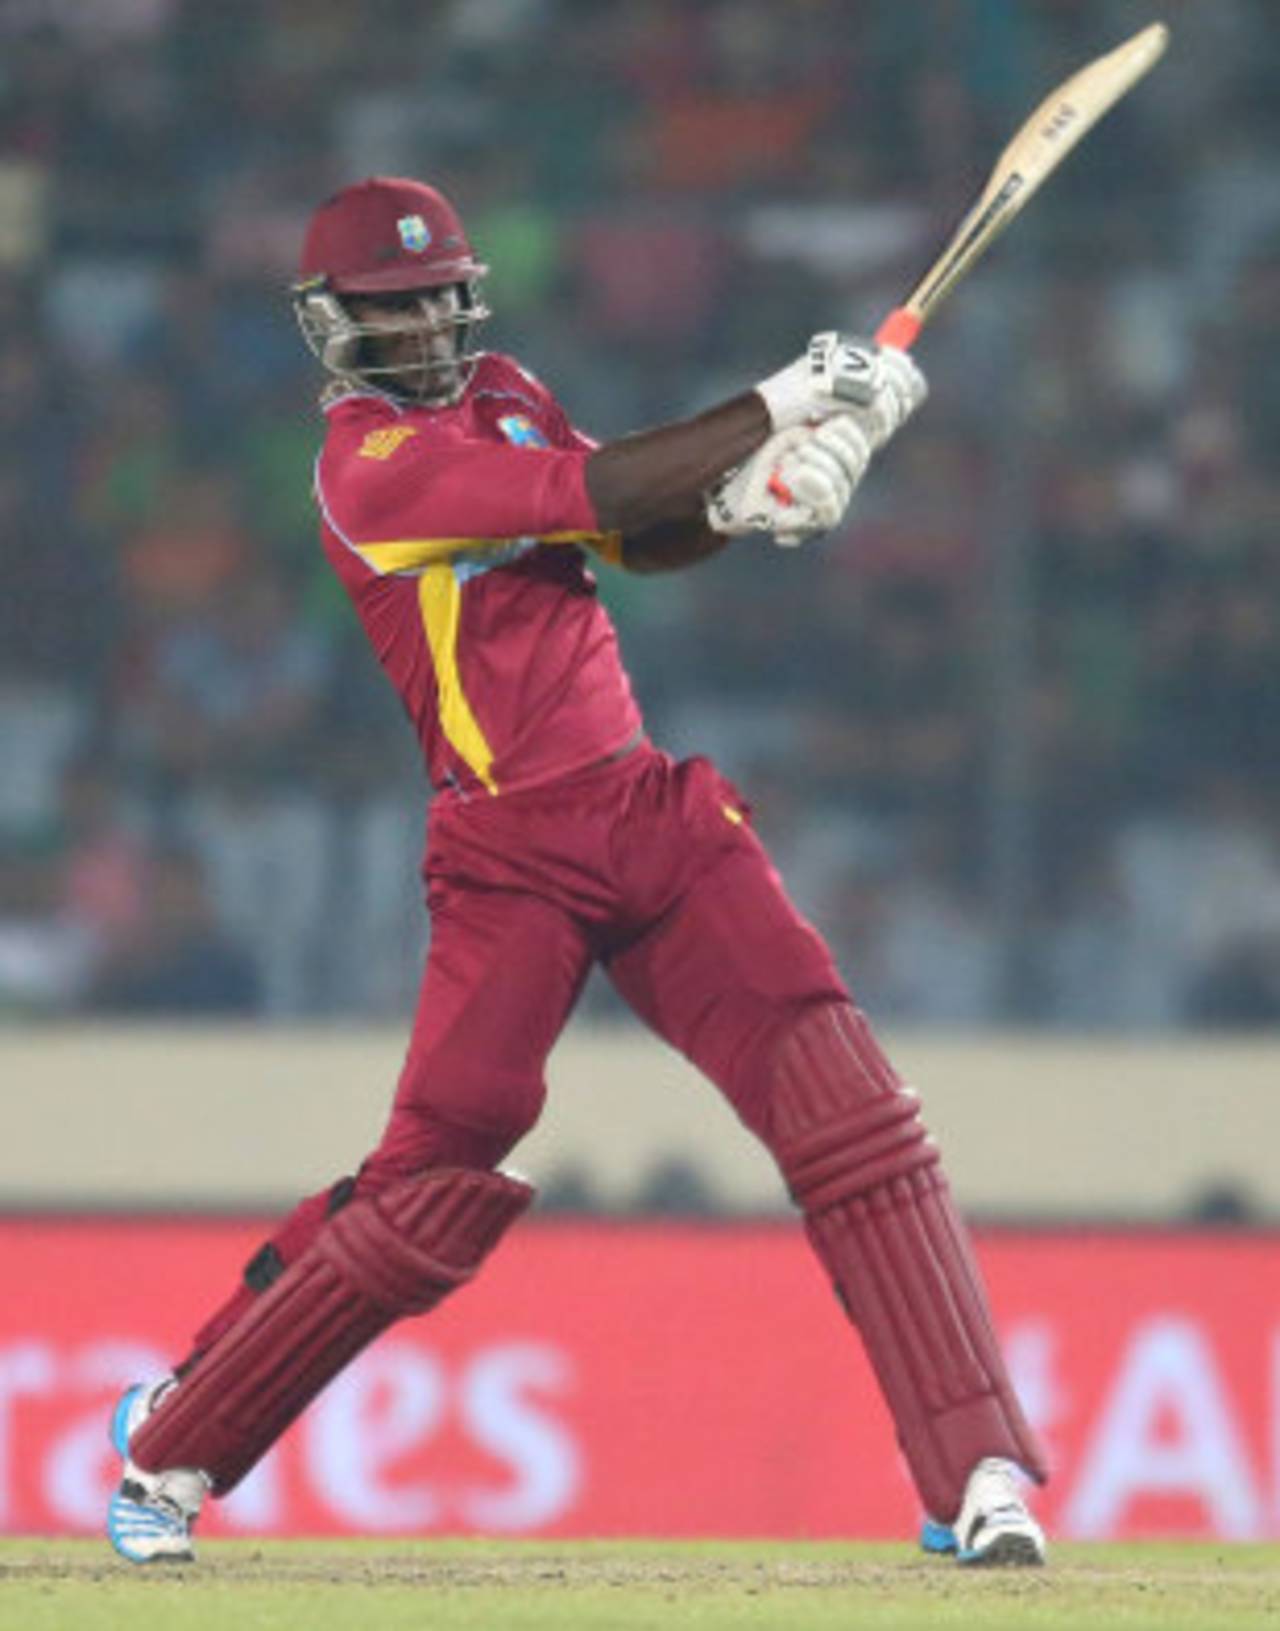 Darren Sammy has been hitting sixes at will to turn matches&nbsp;&nbsp;&bull;&nbsp;&nbsp;Getty Images